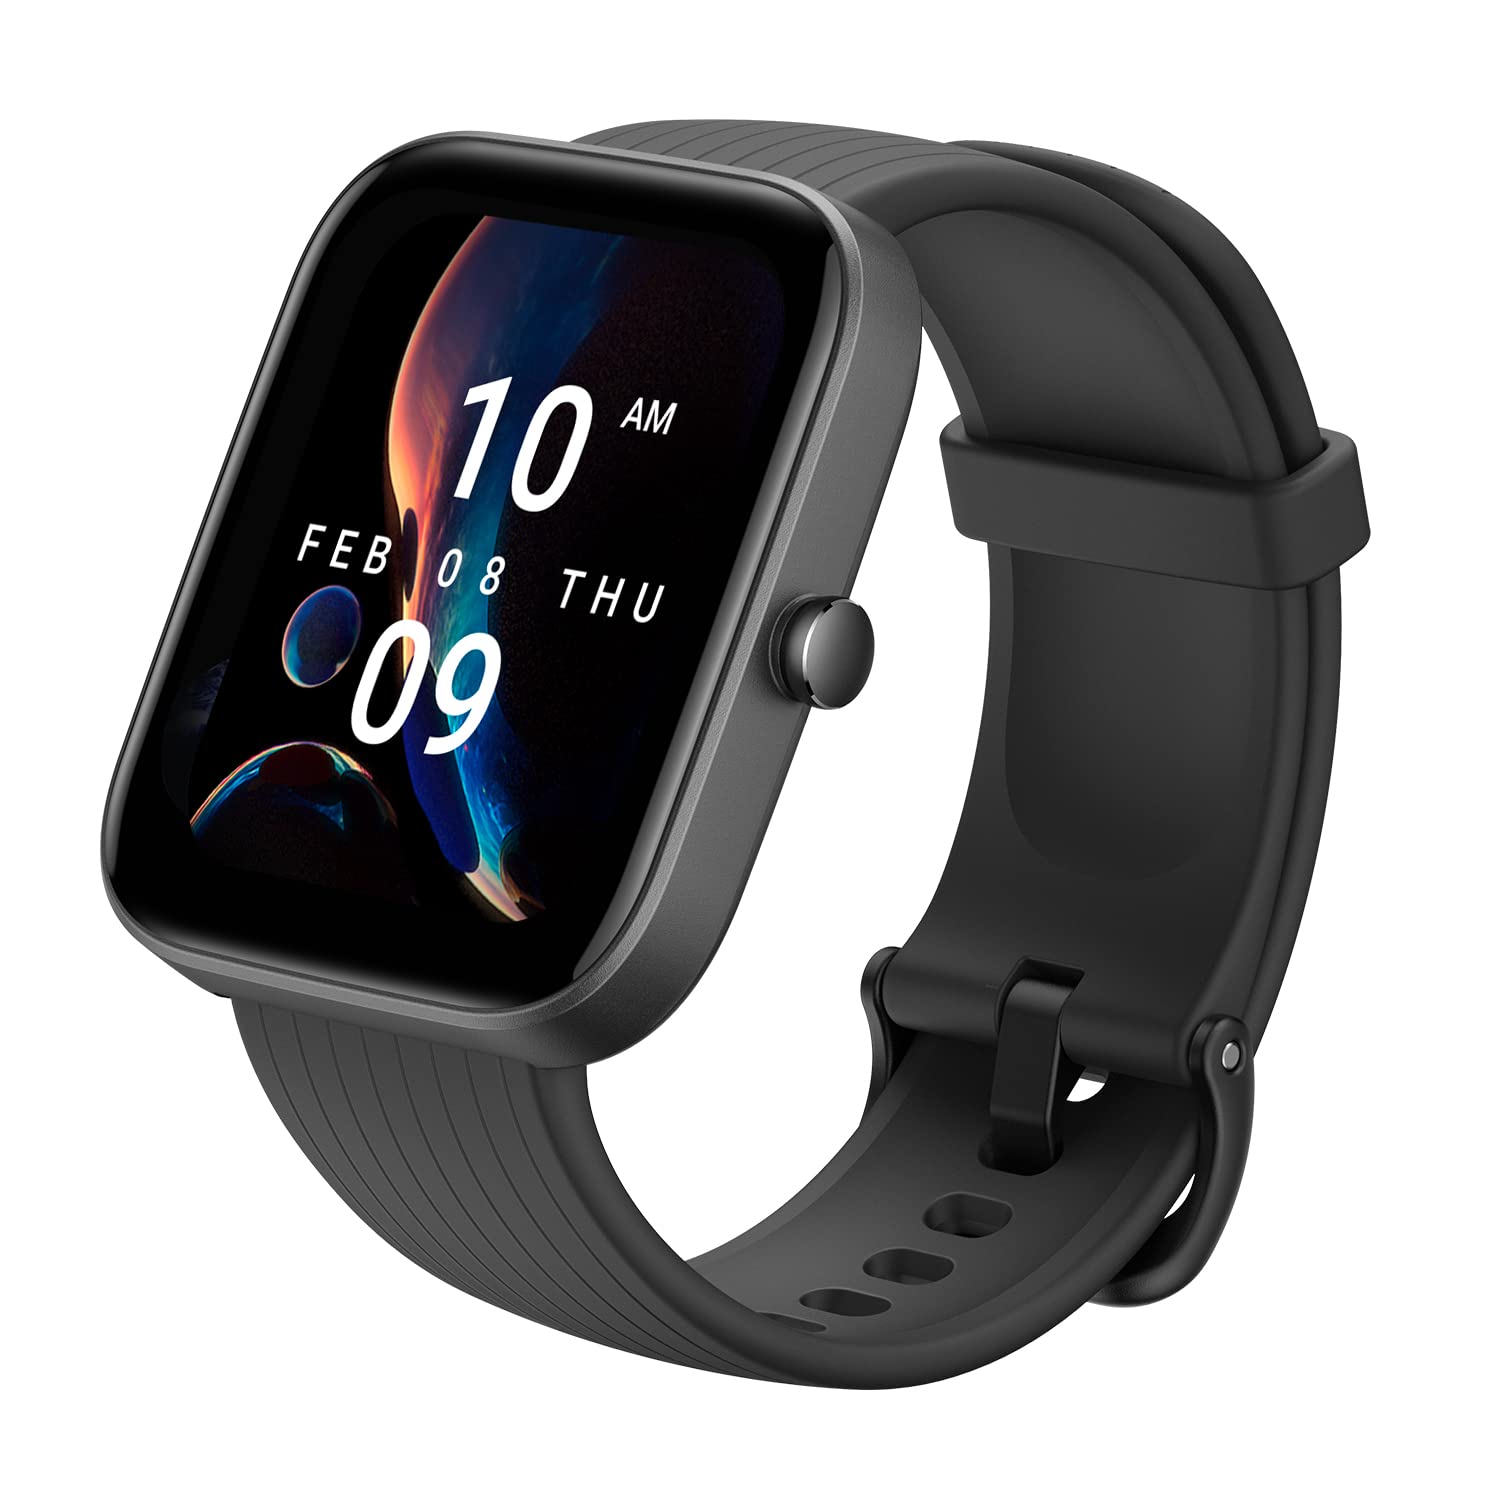 Amazfit Bip 3 Pro Smart Watch for Android iPhone, 4 Satellite Positioning Systems, 1.69